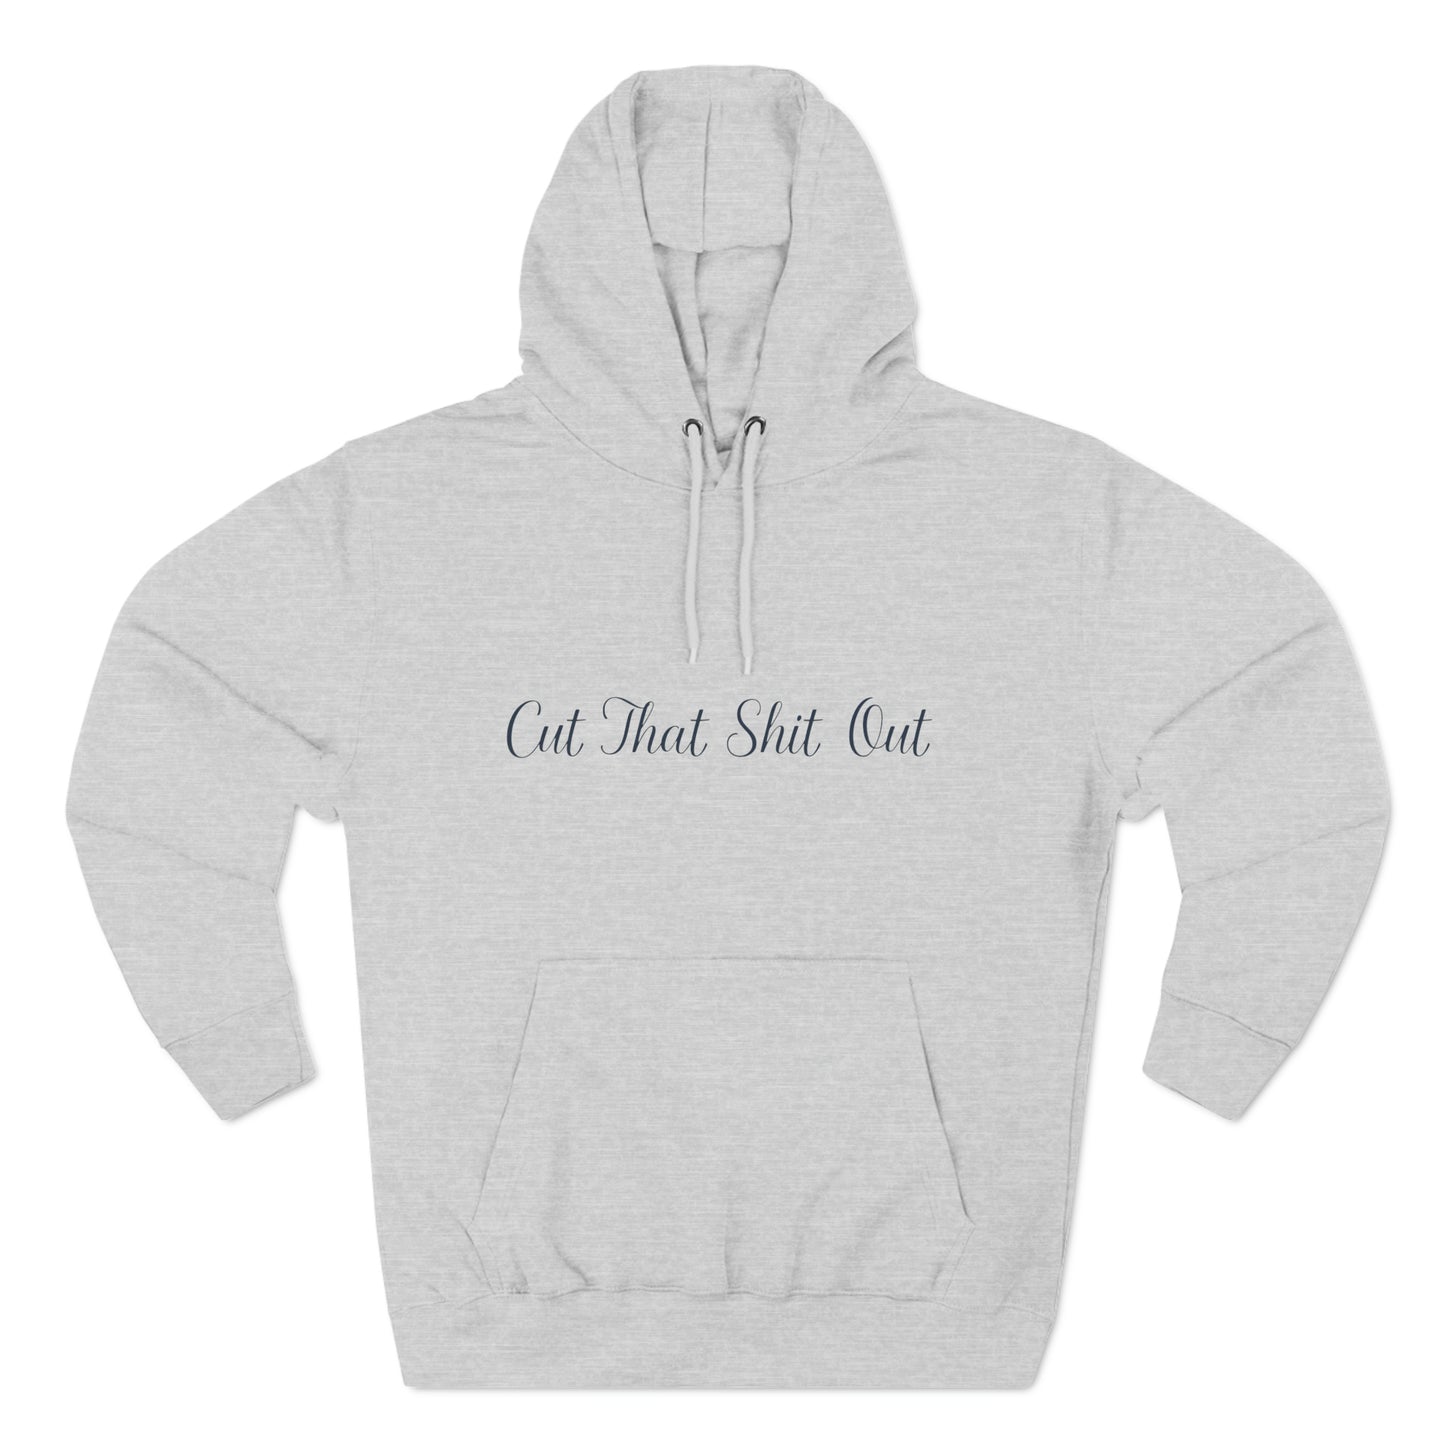 Cut That Shit Out Hoodie - Unisex